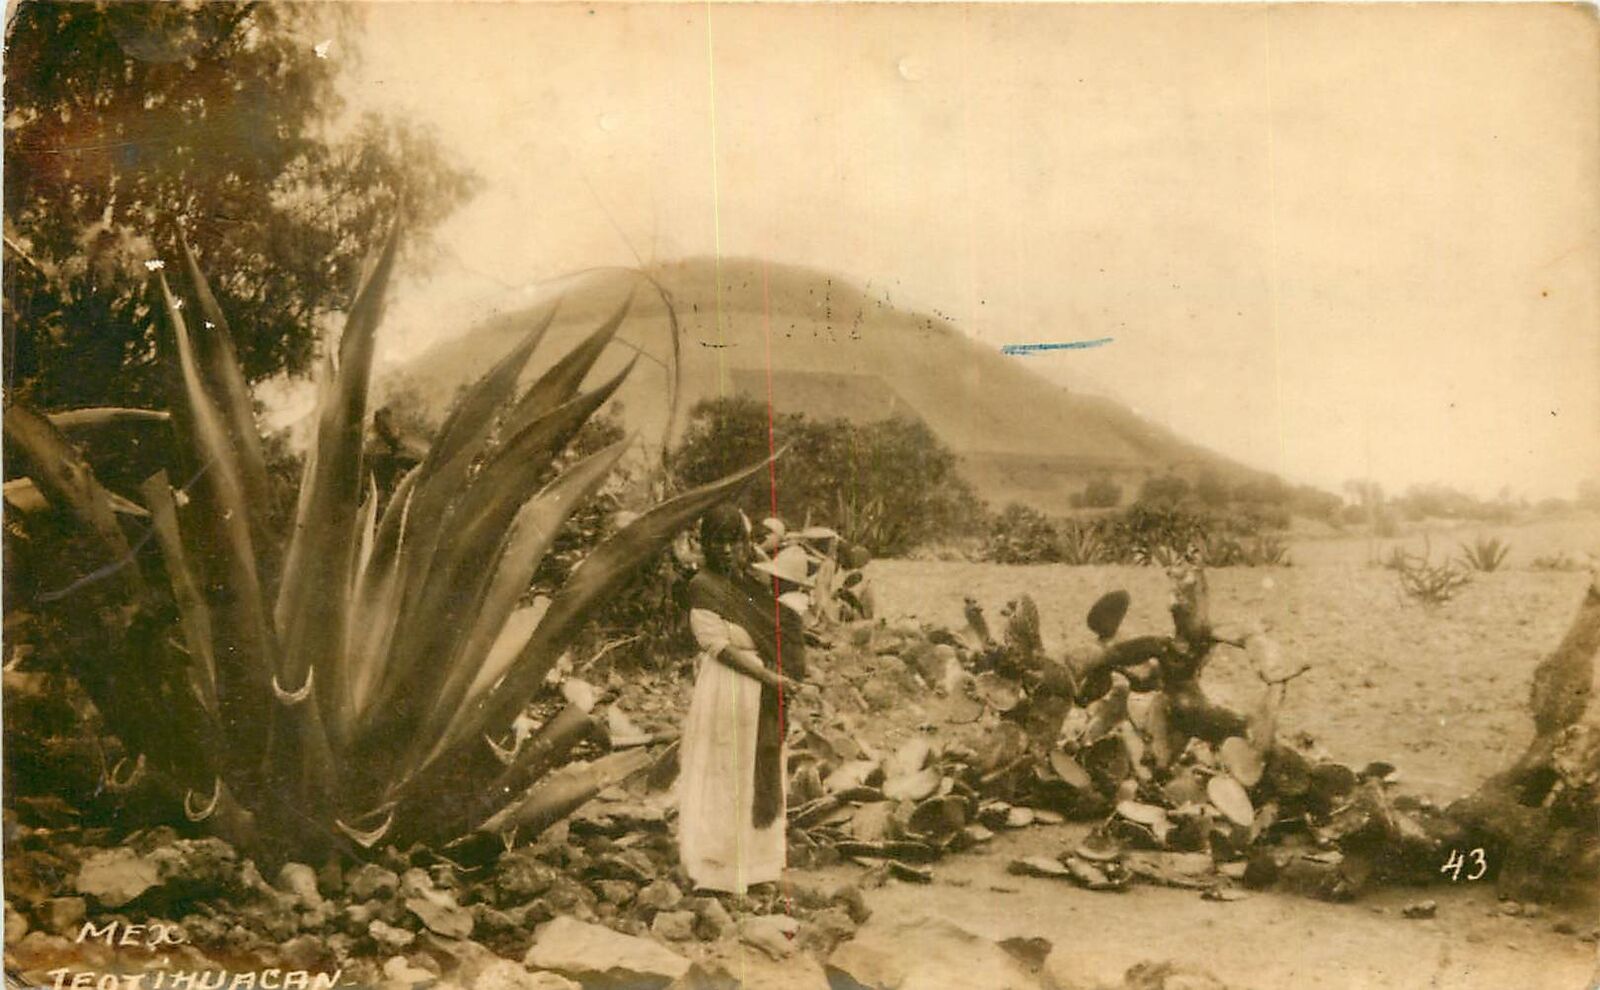 Mexico, Teotihuacan Pyramid & Native Woman & Child Early Real Photo Postcard